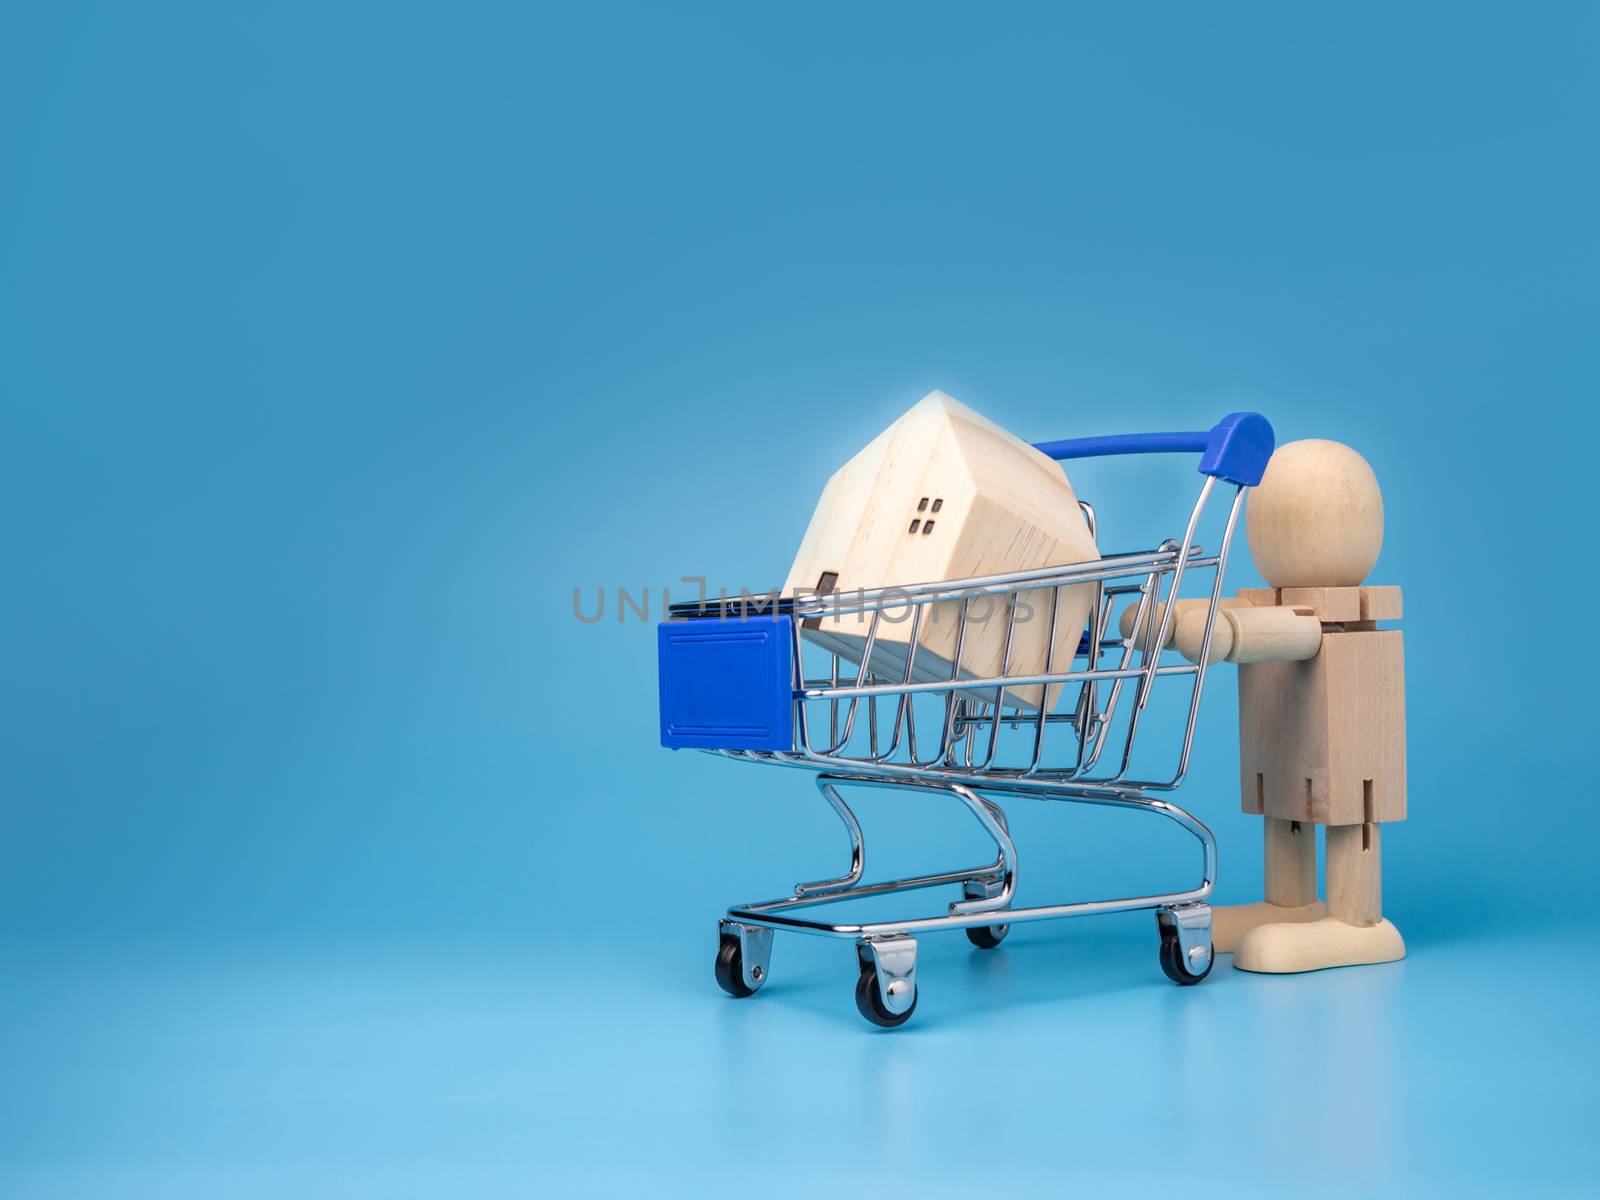 Wooden dolls that Stand next to the shopping cart With a model wooden house on top And has a blue background. Home buying and selling ideas